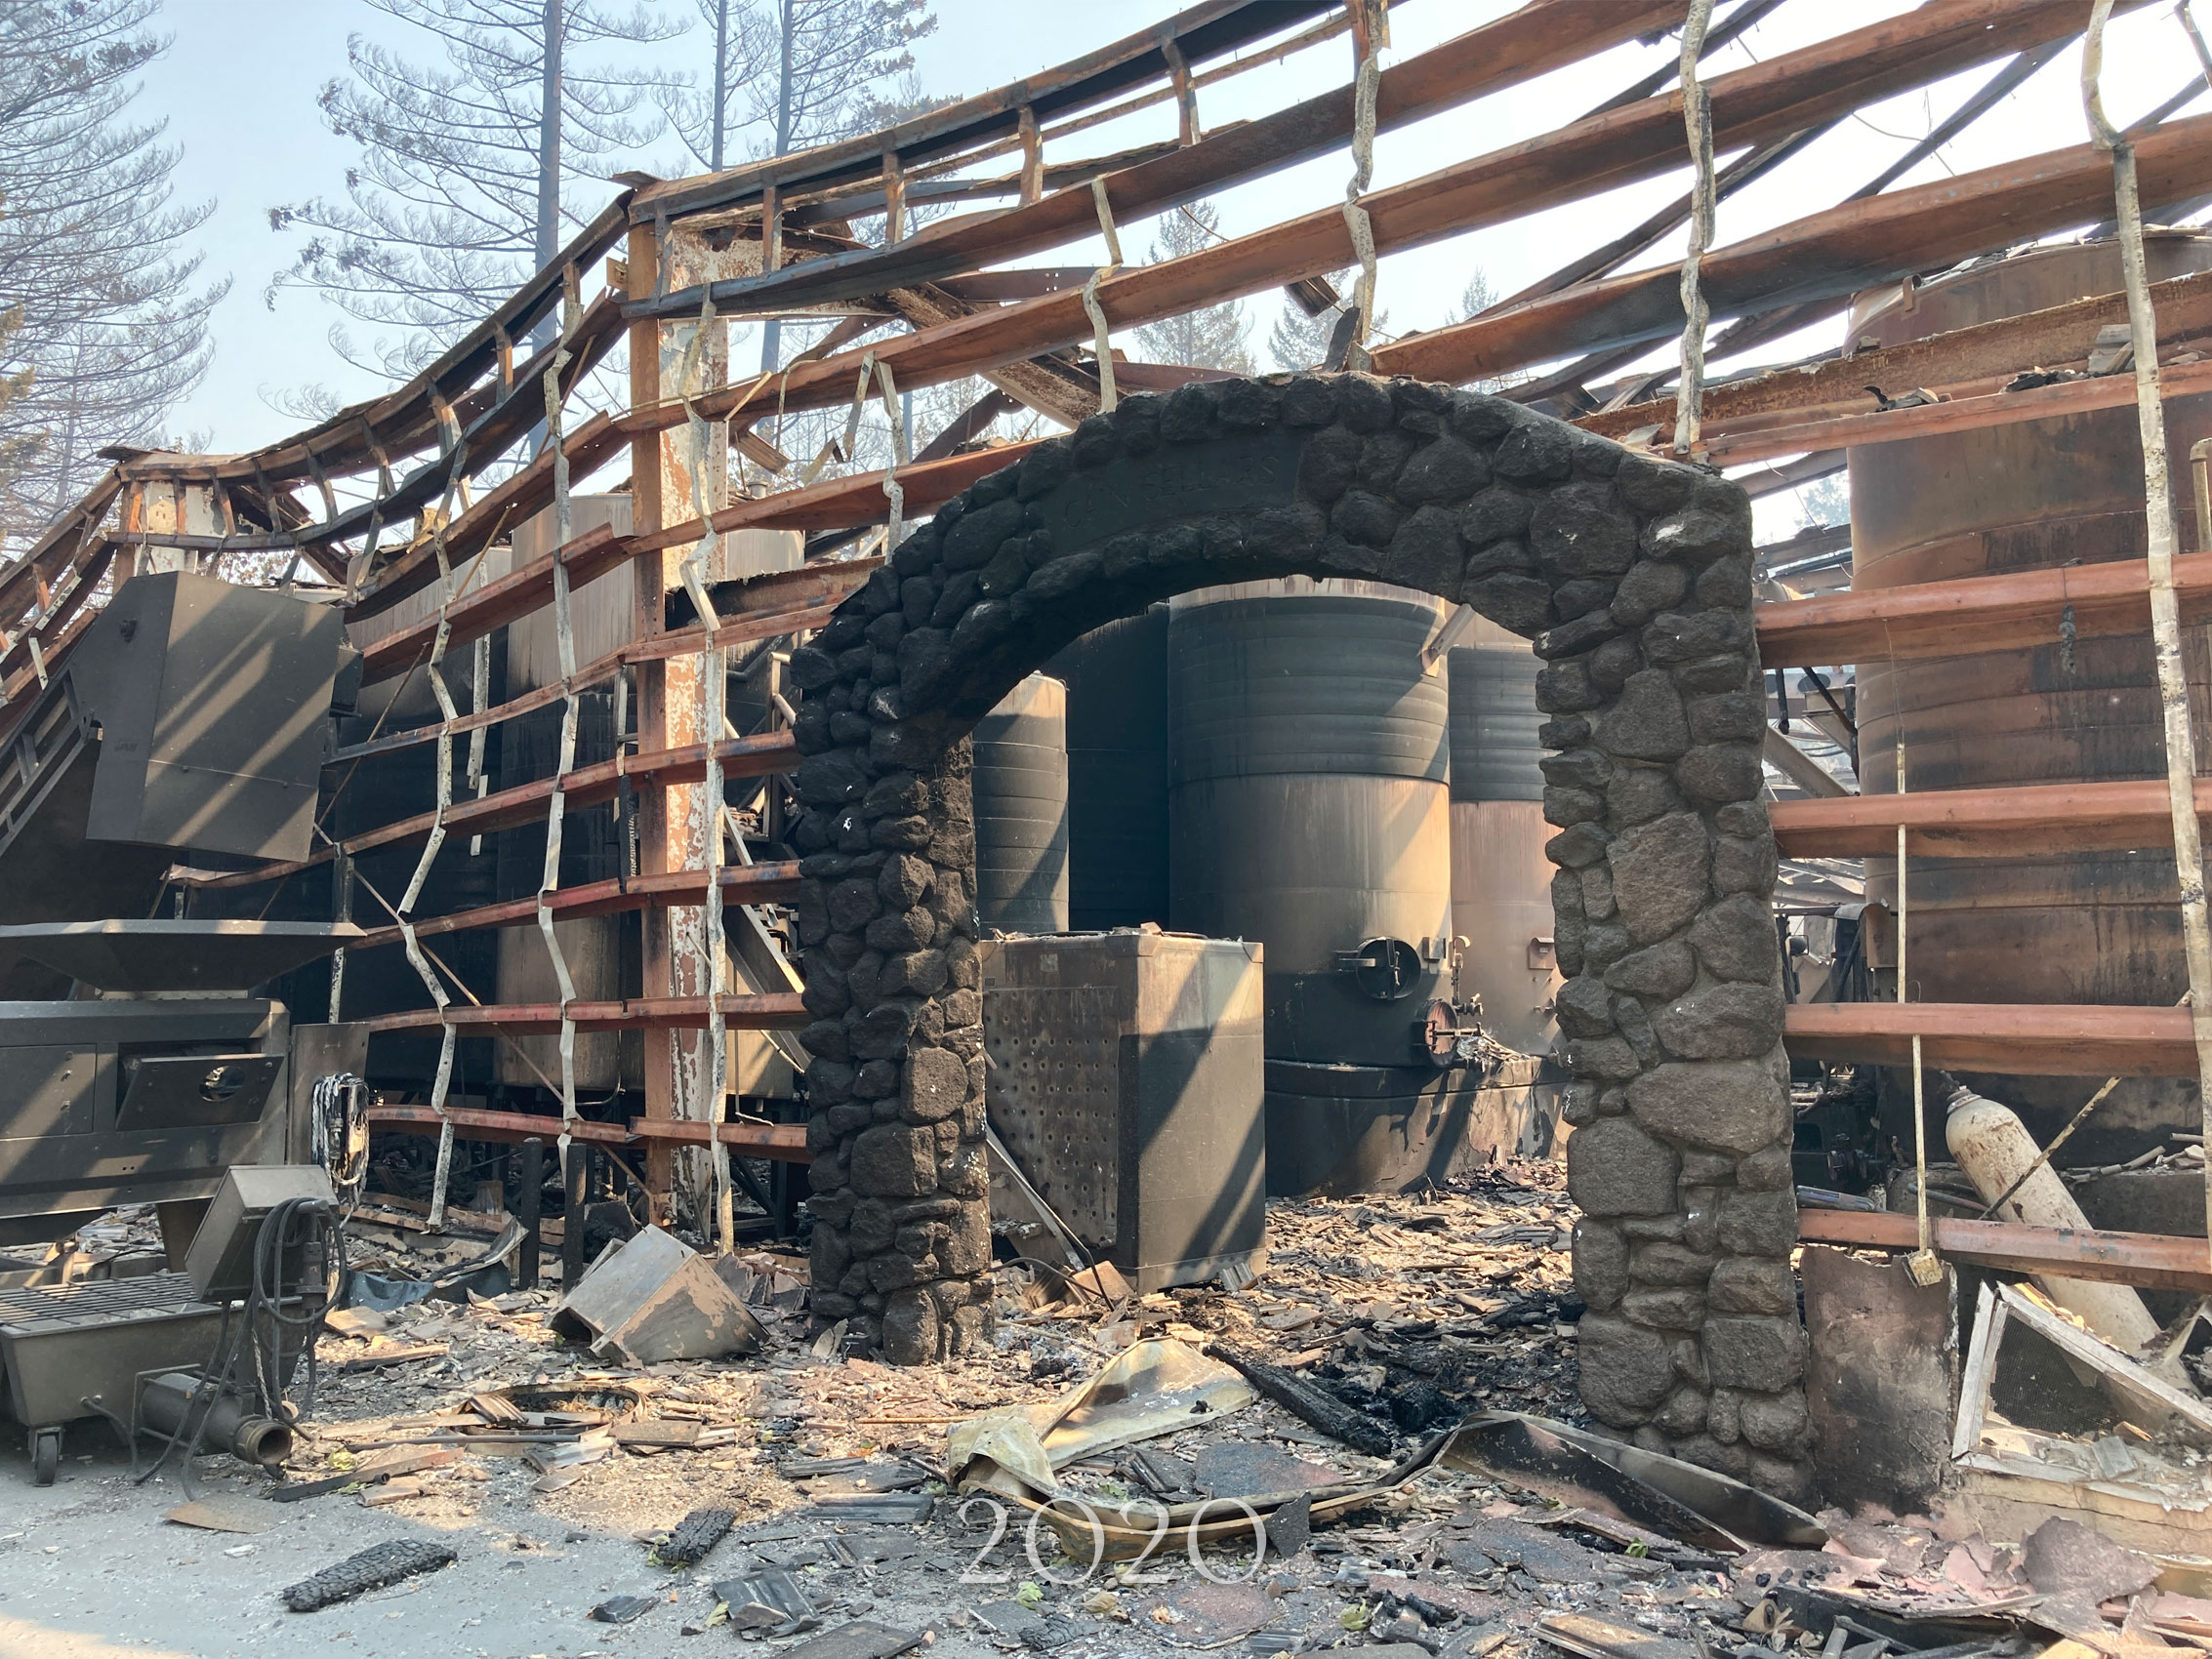 The Cain Cellar after the 2020 Glass Fire